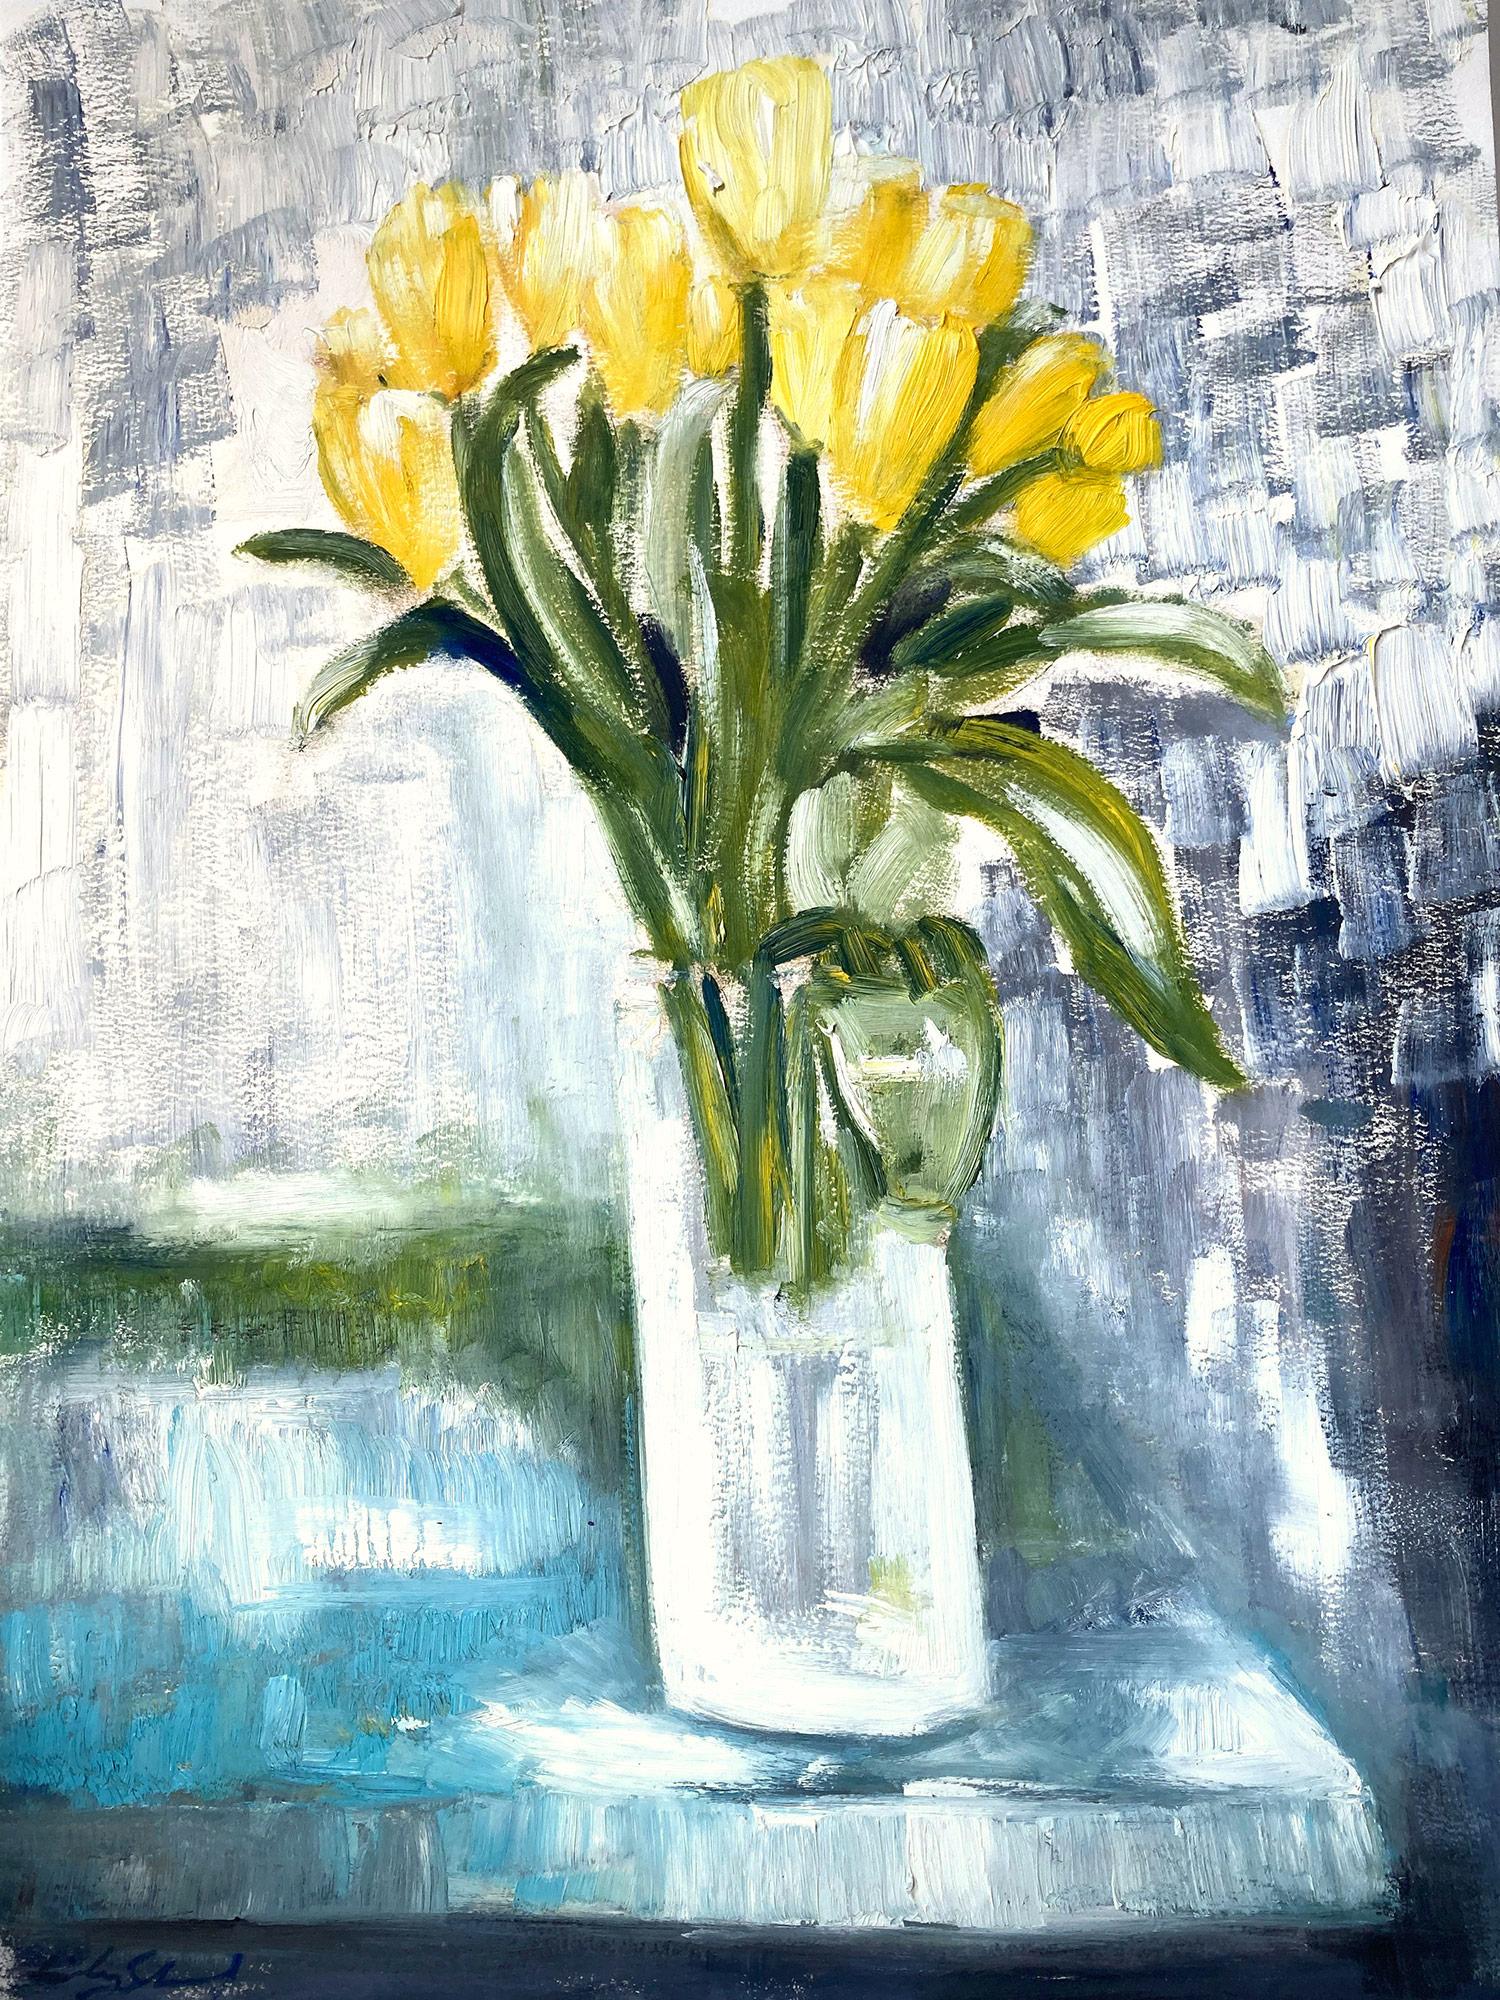 "Yellow Tulips" Impressionistic Colorful Contemporary Oil Painting on Paper